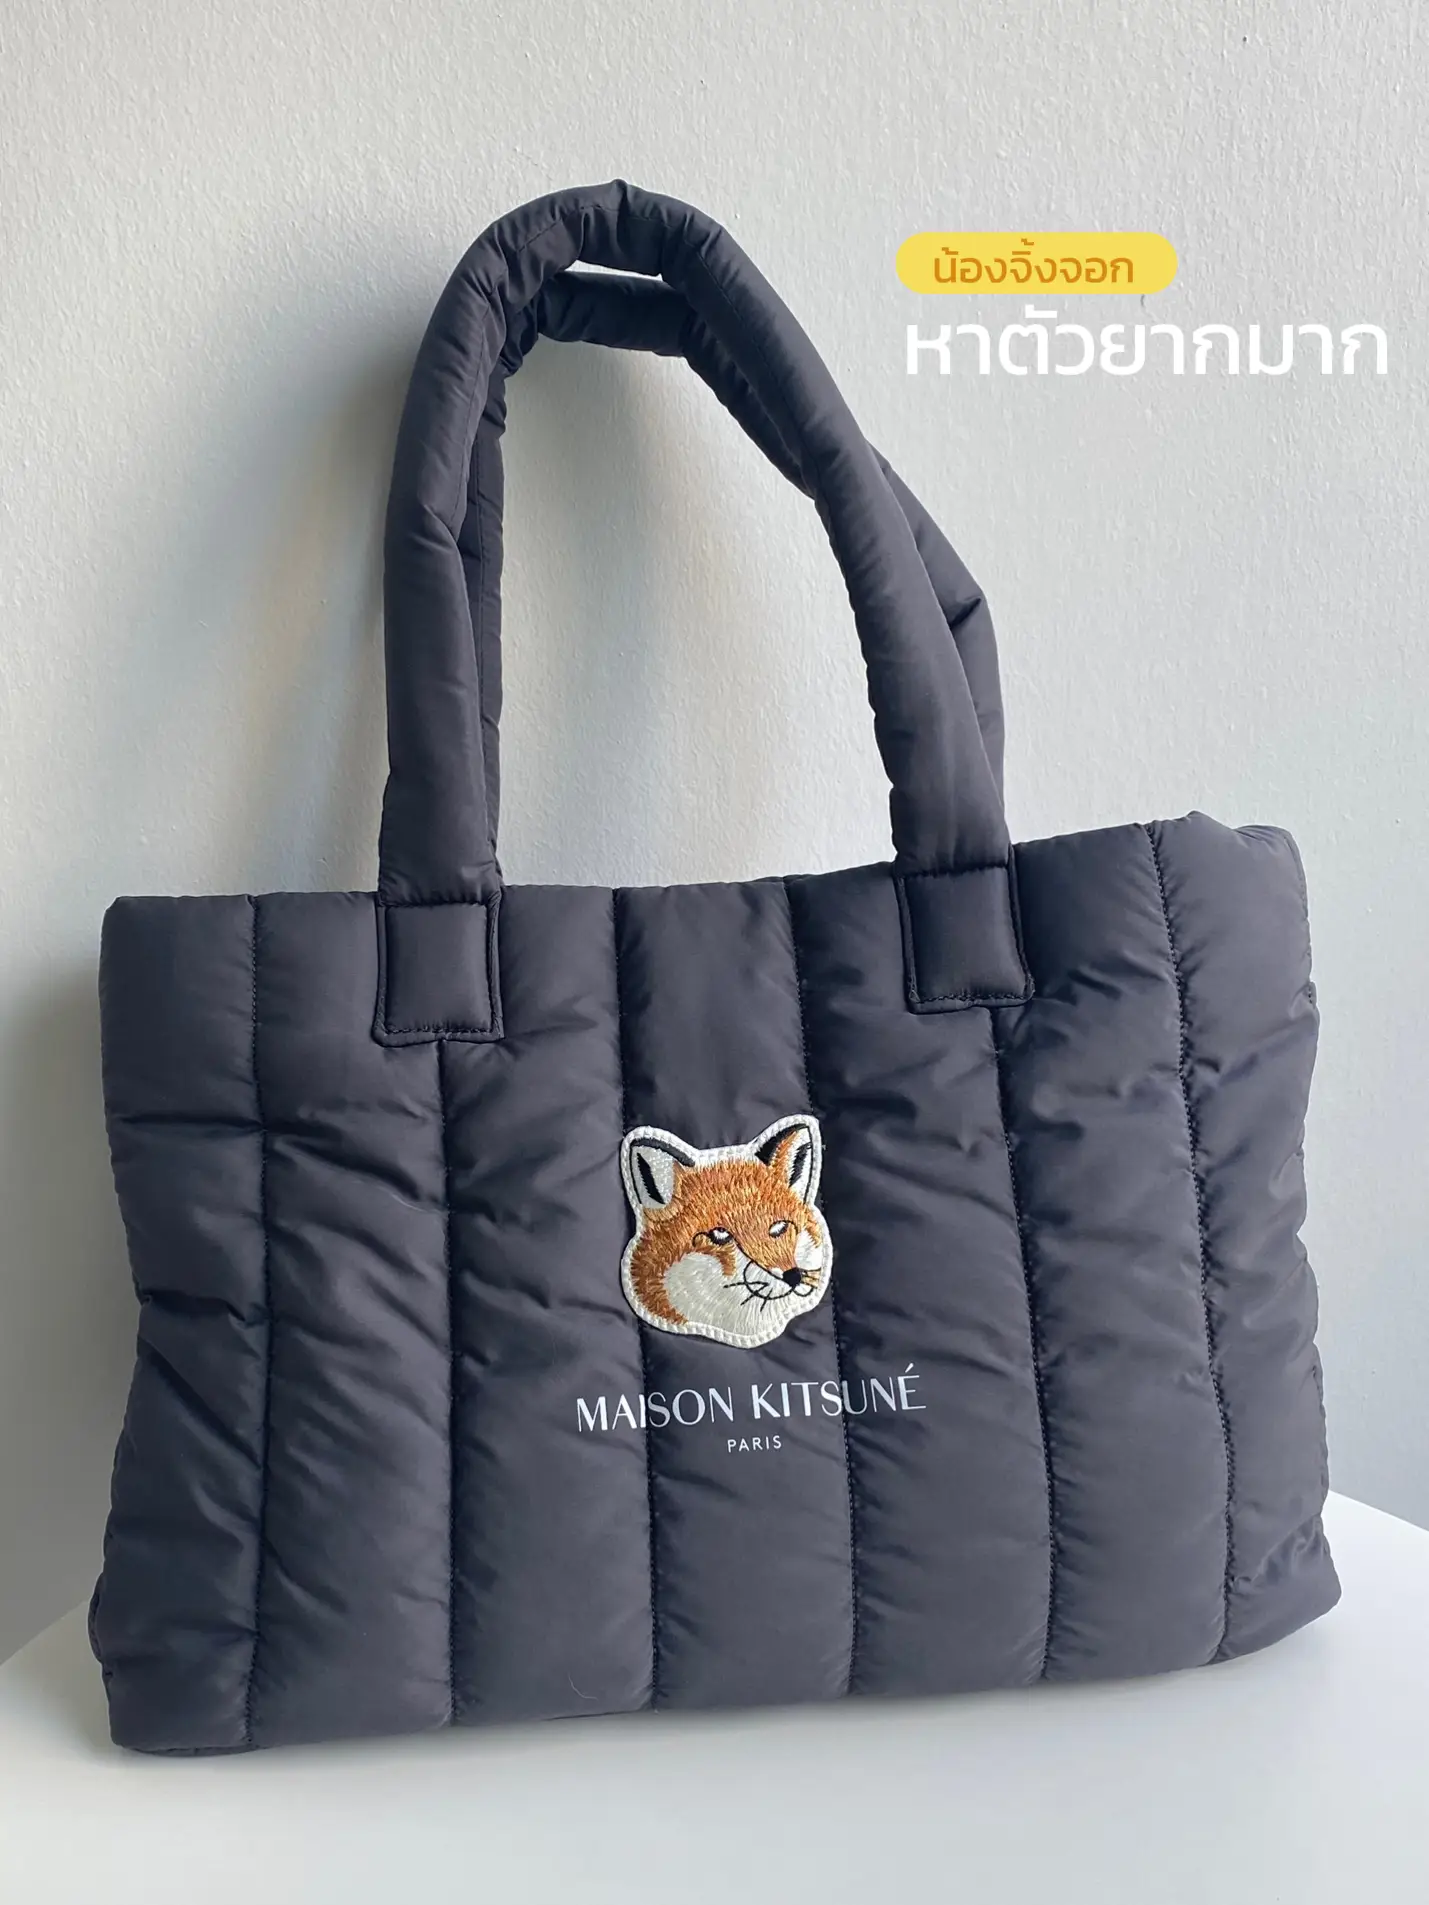 Hunting   🏻 a rare bag.🦊 | Gallery posted by Mookyiww | Lemon8